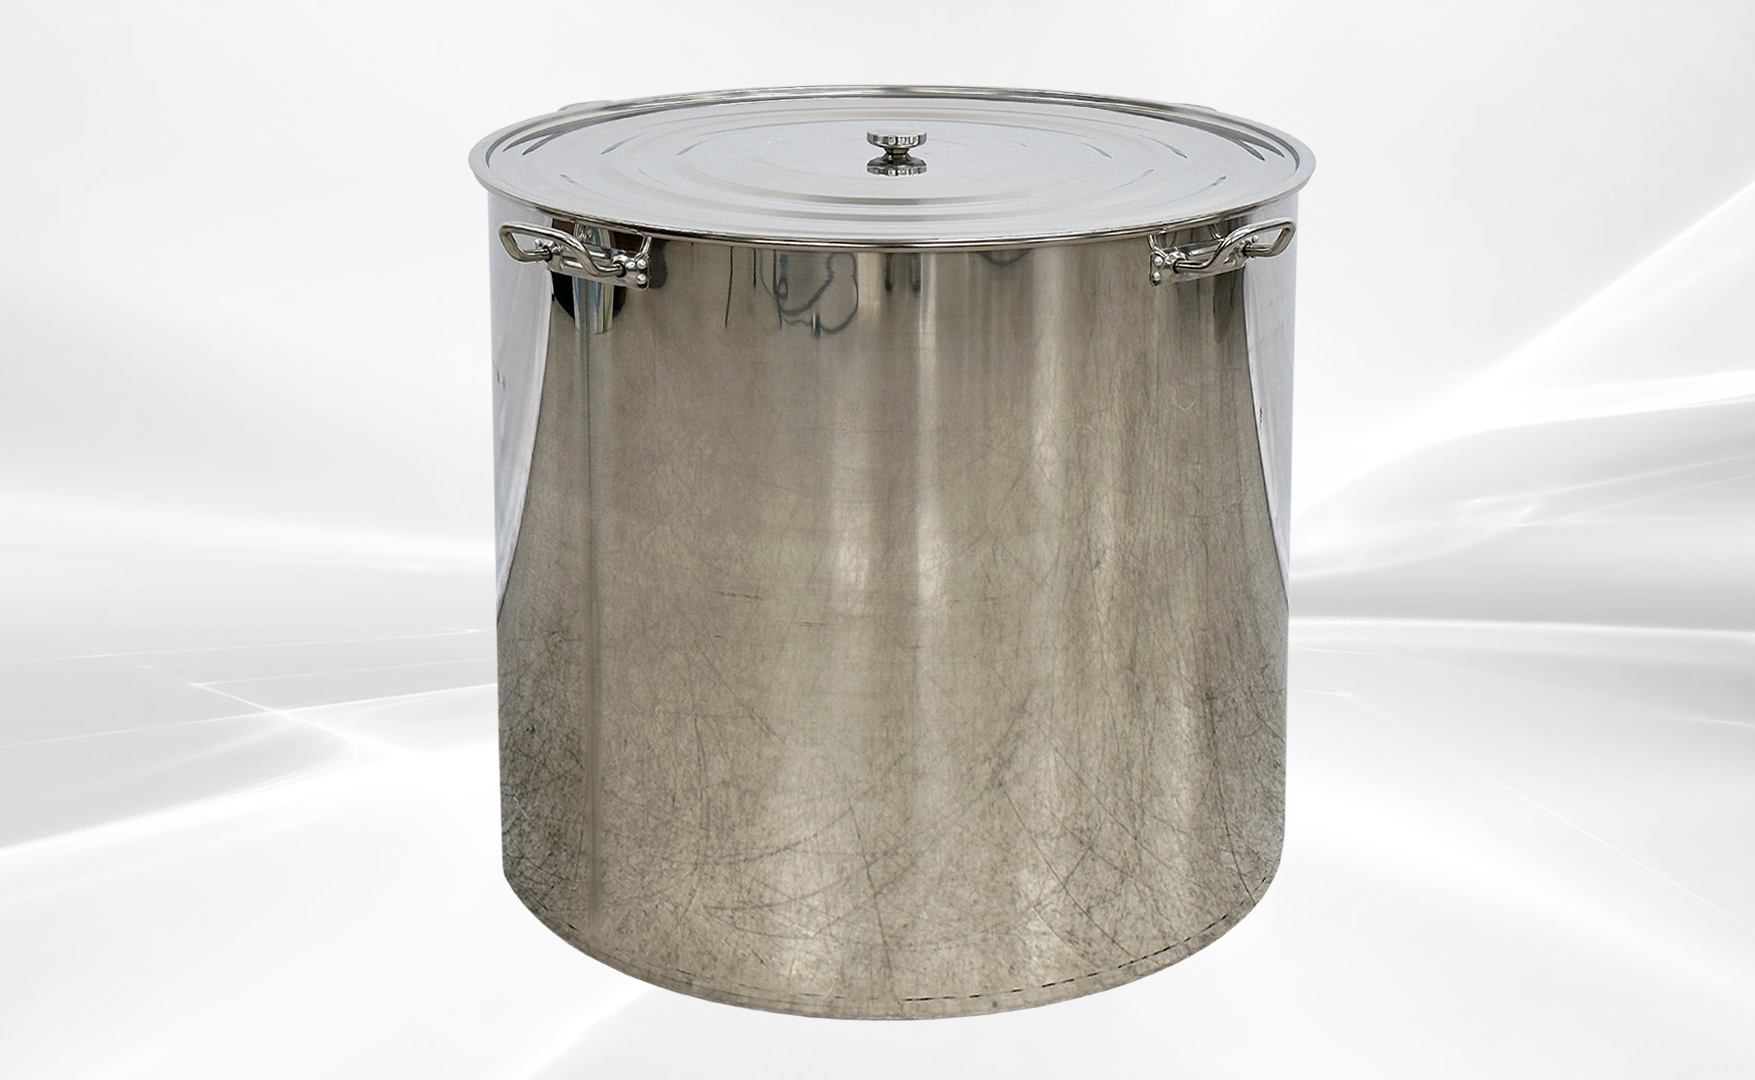 Polished Stainless Steel 400L/422 qt Stock Pot D32H32